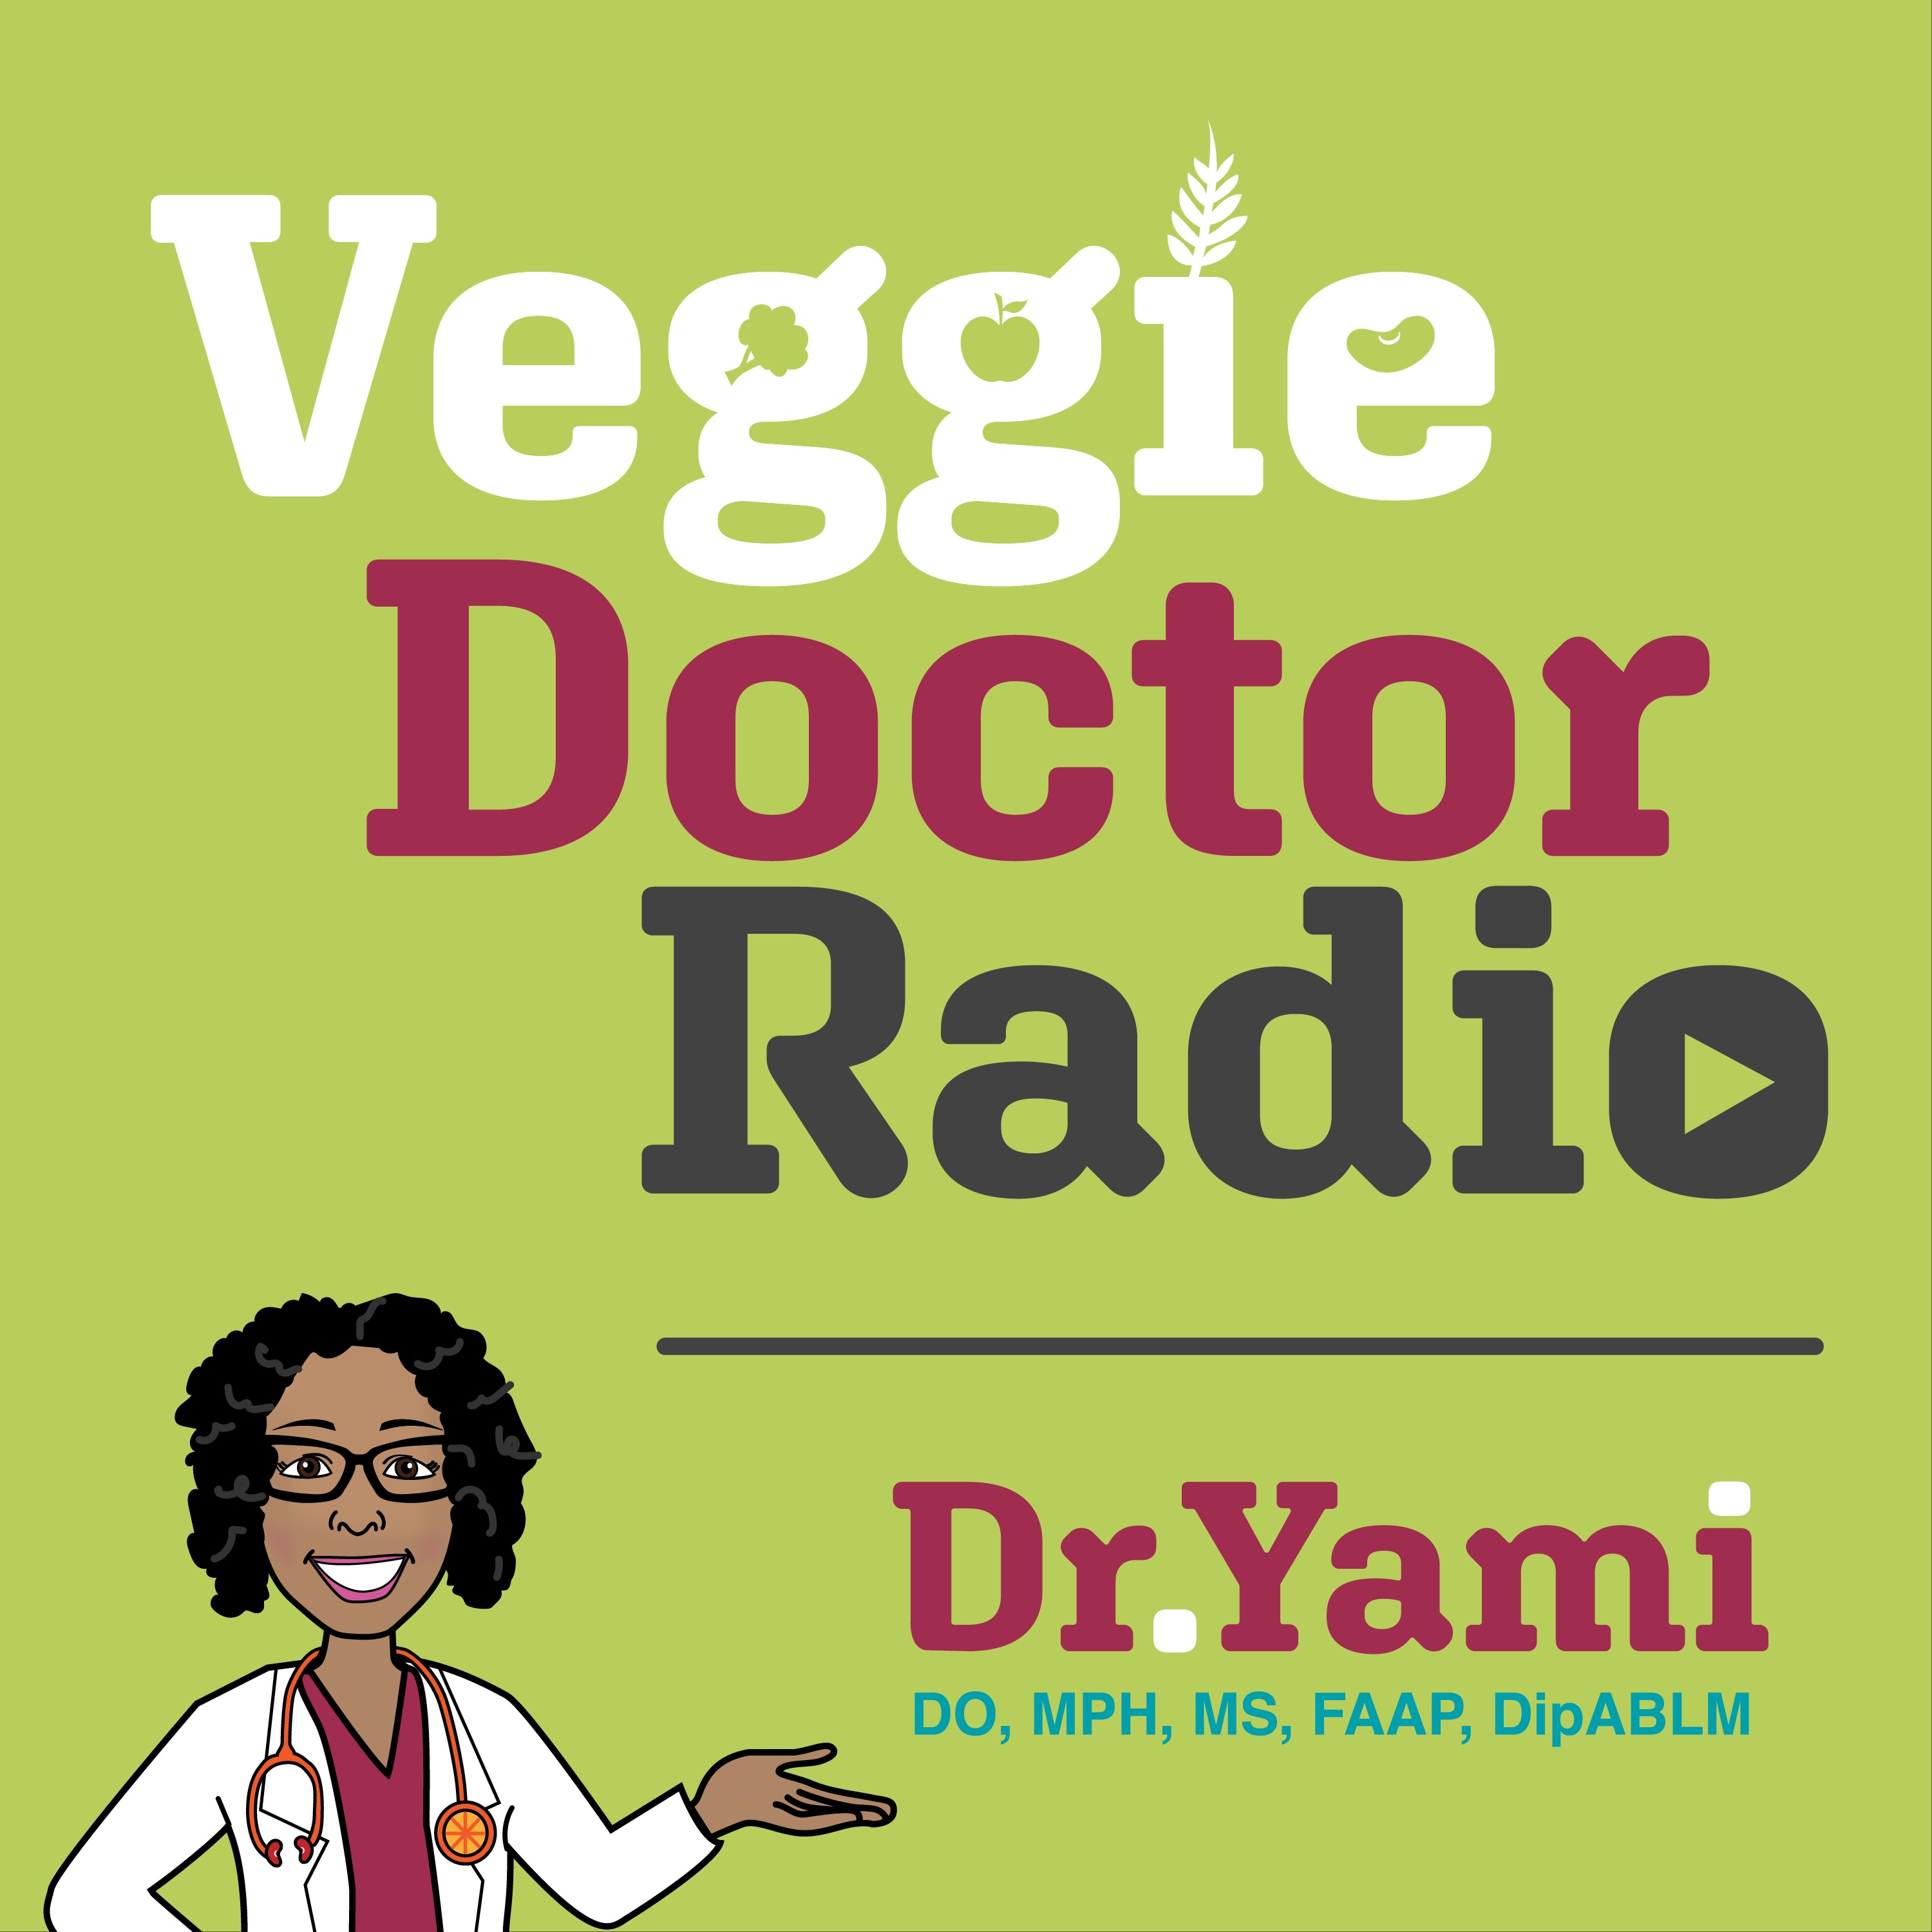 196: Intentional Eating vs. Intentional Weight Loss: Exploring Comprehensive Coaching with Dr. Gabrielle Fundaro and Shannon Beer (Veggie Doctor Radio)